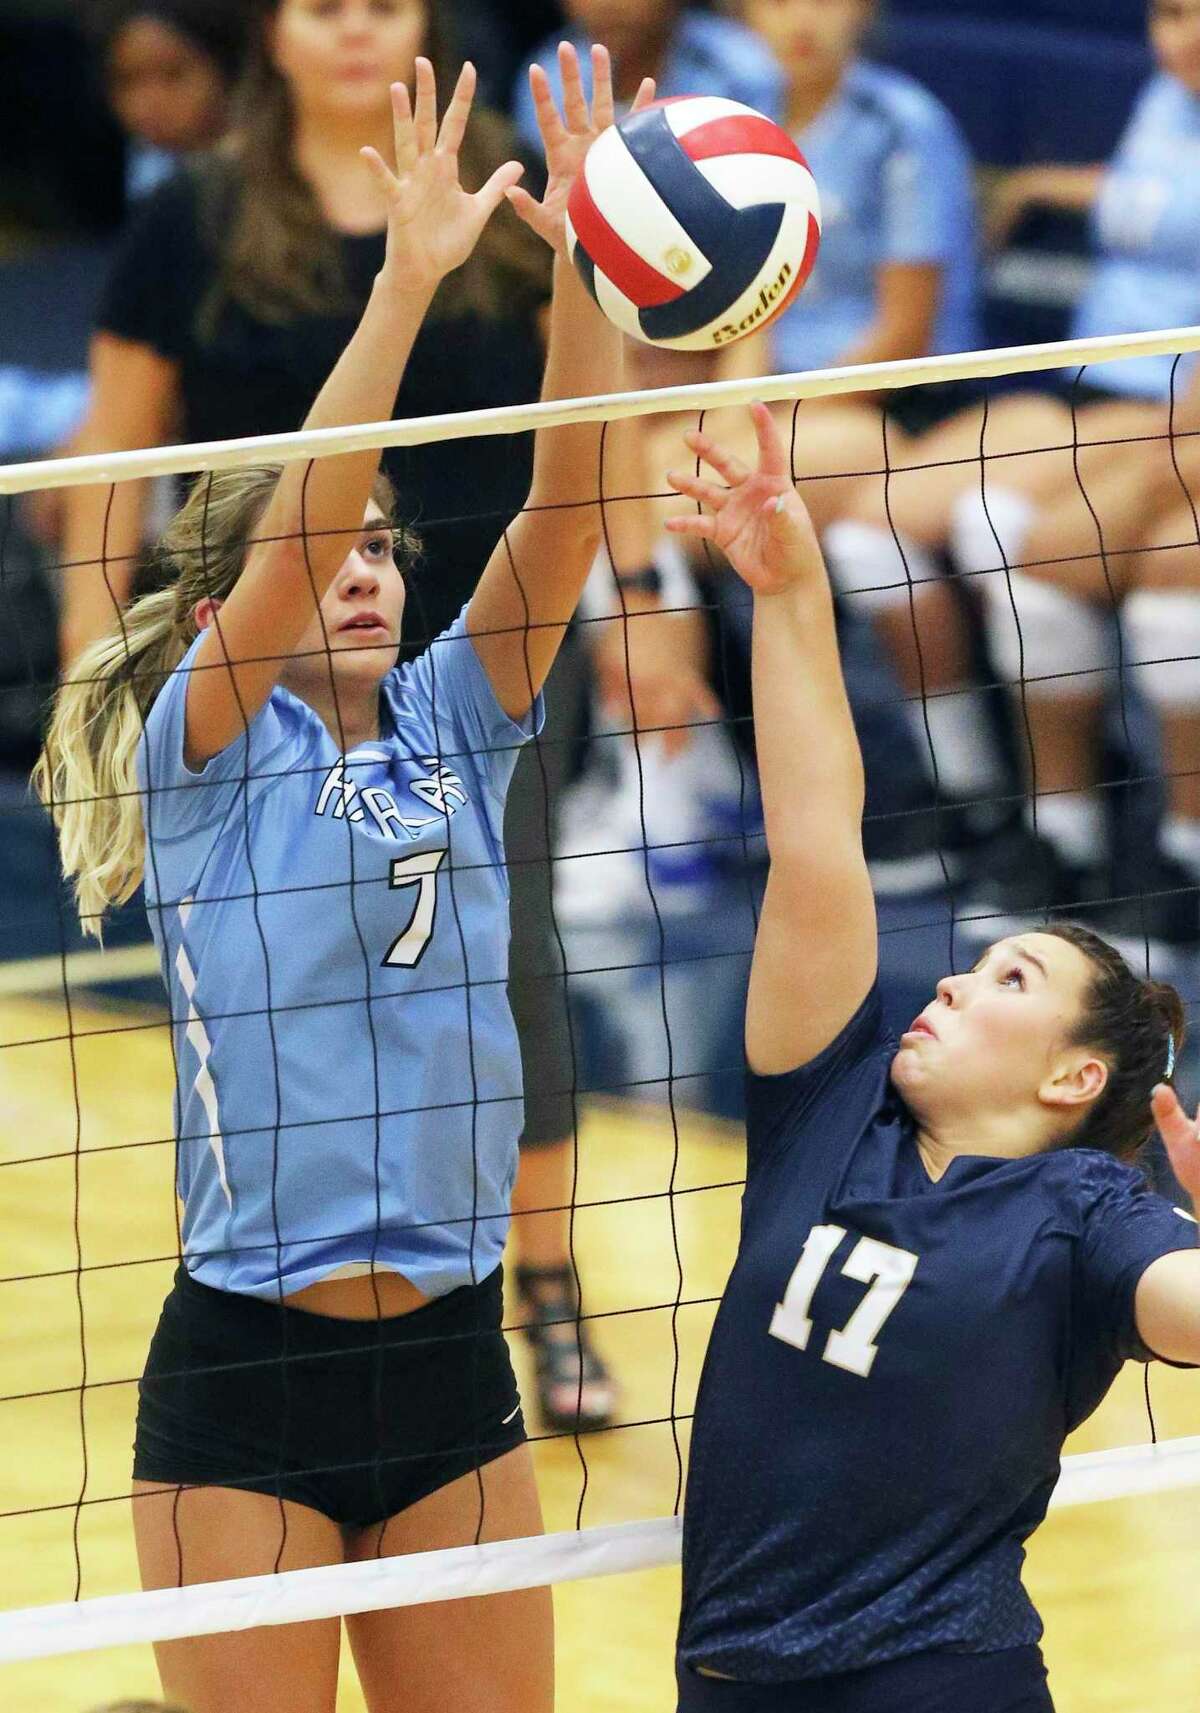 The Hawk's Kiana Fallaha contests a tip shot by the Panther's Ava Himstreet as Harlan plays O'Connor at Taylor Field House on August 120, 2019.